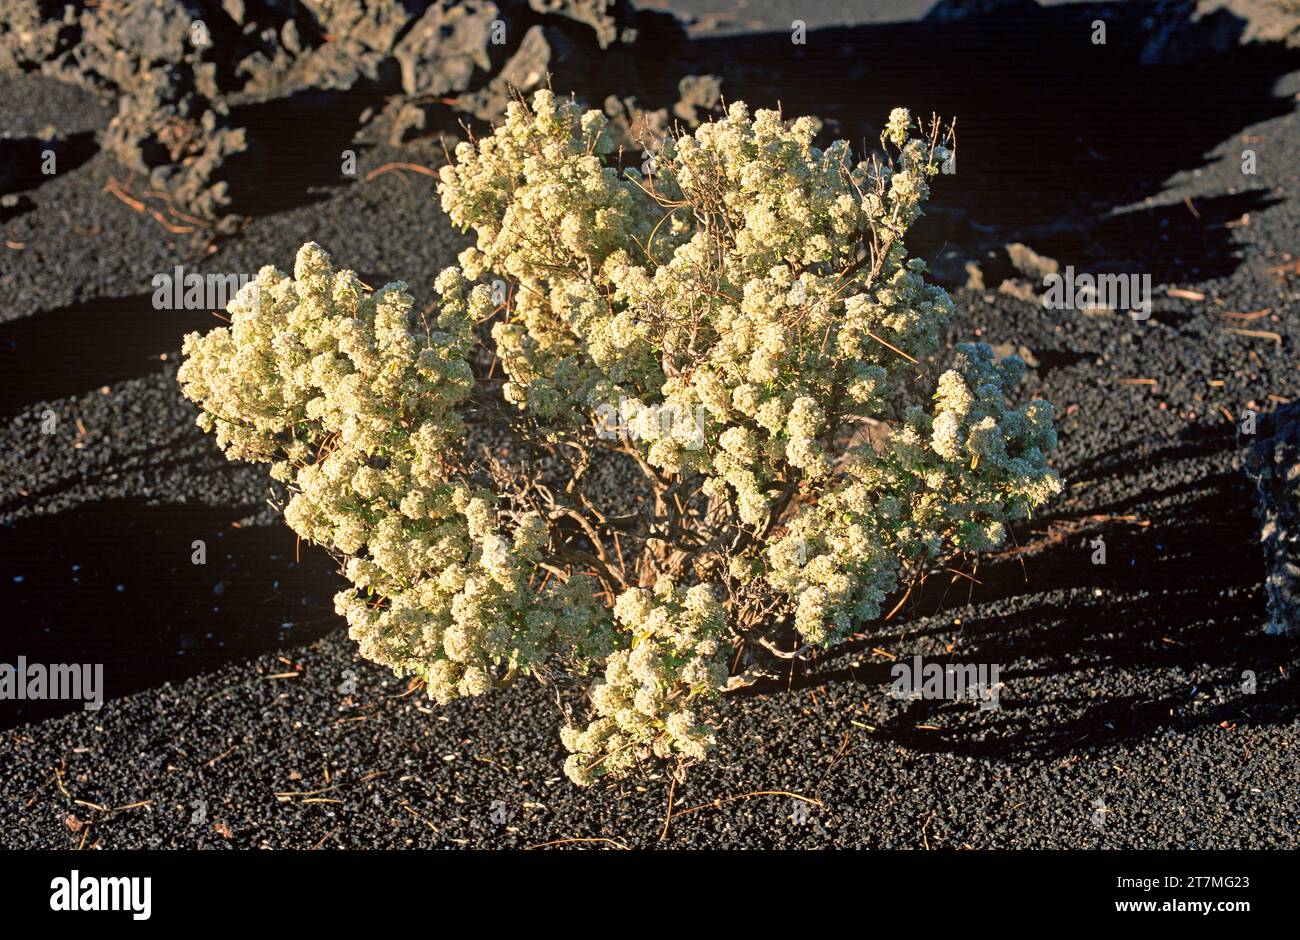 Poleo de pinar (Bystropogon origanifolius) is an aromatic shrub endemic to Canary Islands except Lanzarote and Fuerteventura. This photo was taken in Stock Photo